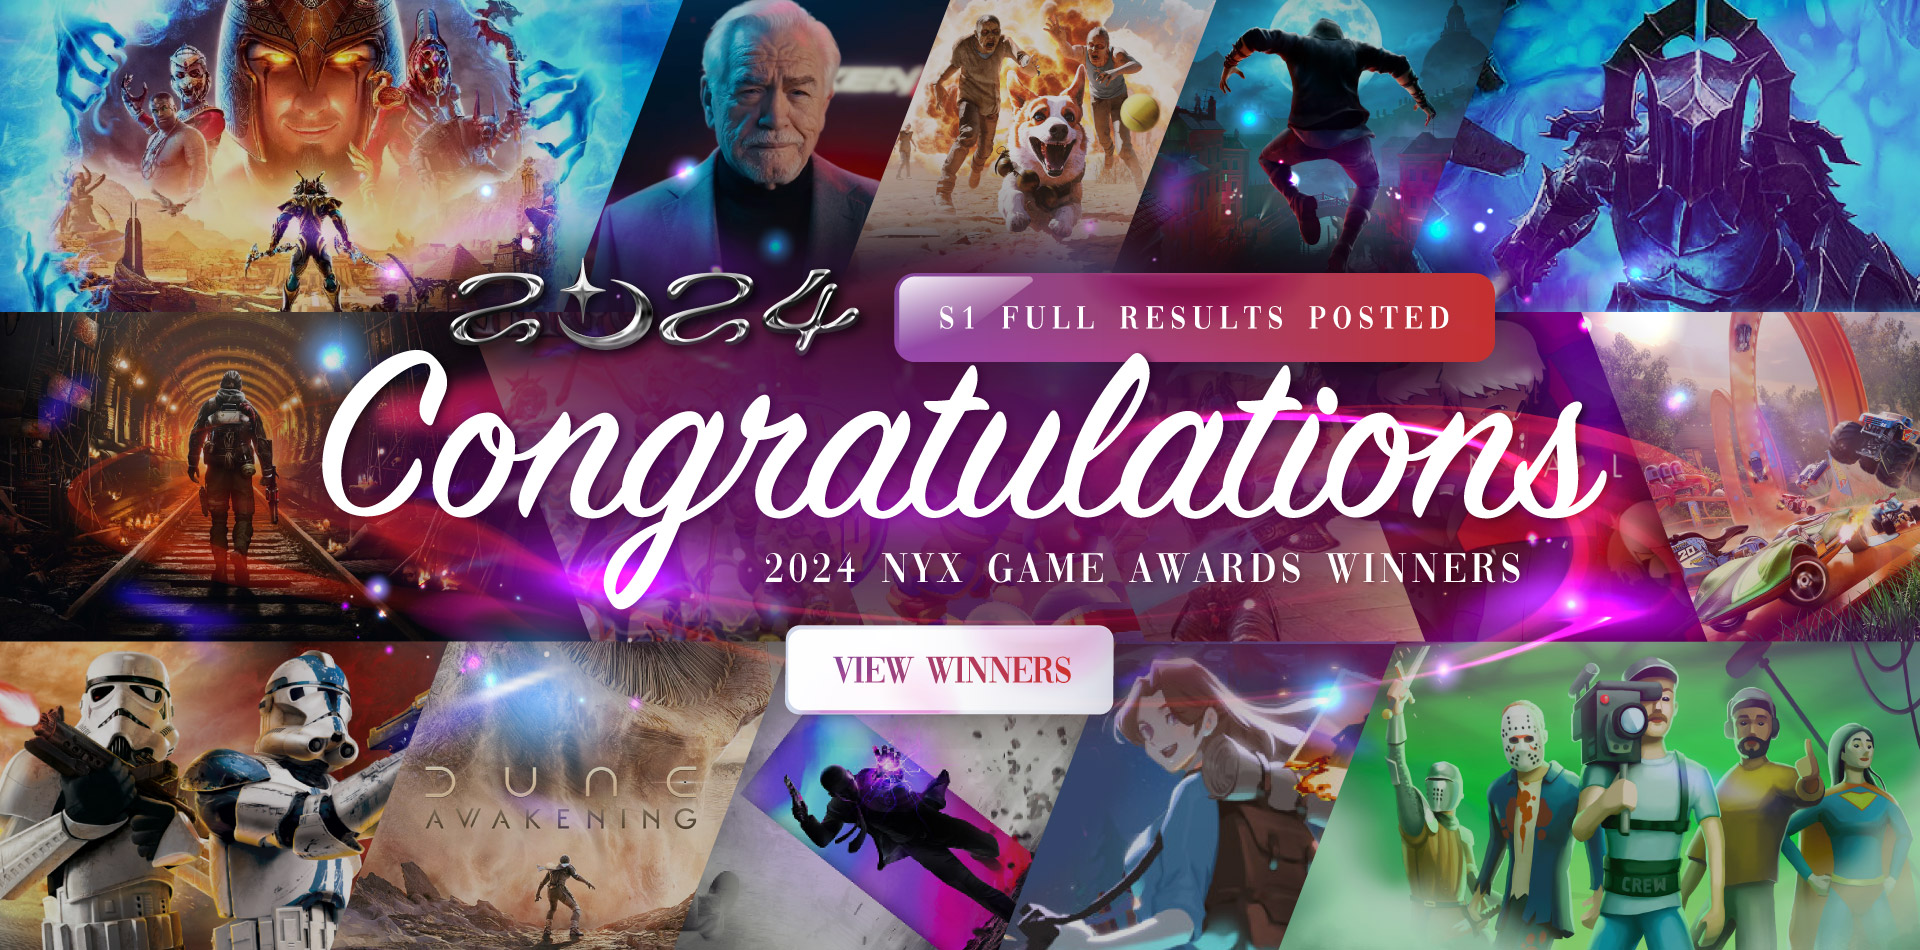 2024 NYX Game Awards Season 1 Full Results Now Out!